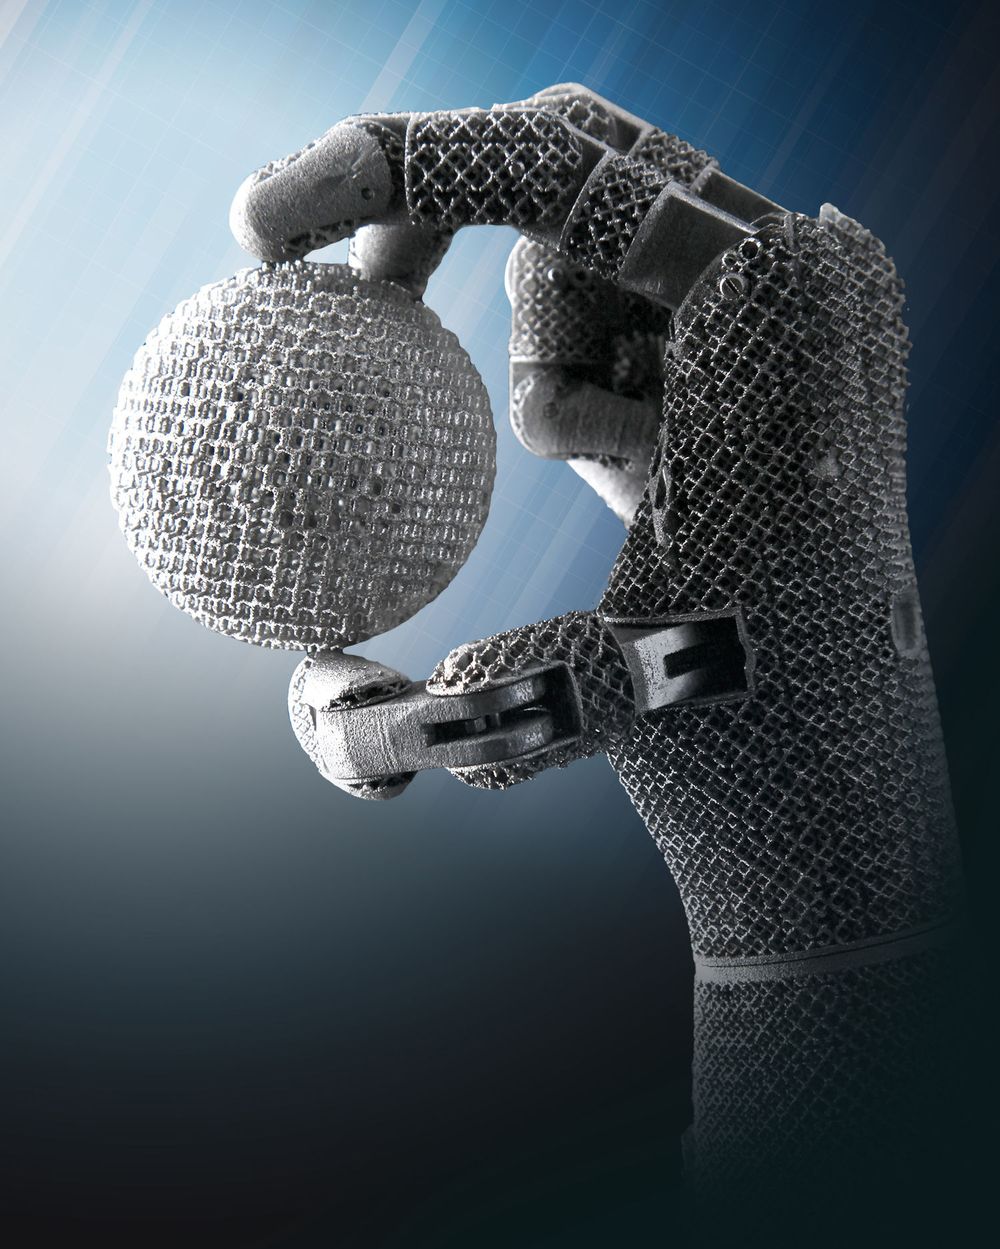 A low-cost lightweight robotic hand based on Additive Manufacturing designed at the Oak Ridge National Laboratories July 12, 2012 in Oak Ridge, TN. The Robotic Hand costs approximately 10 times less than similar devices while commanding 10 times more power than other electric systems. Composed of only 46 parts, this simplified lightweight robotic hand can be manufactured and assembled within 40 hours, and its size can be adjusted based on need.